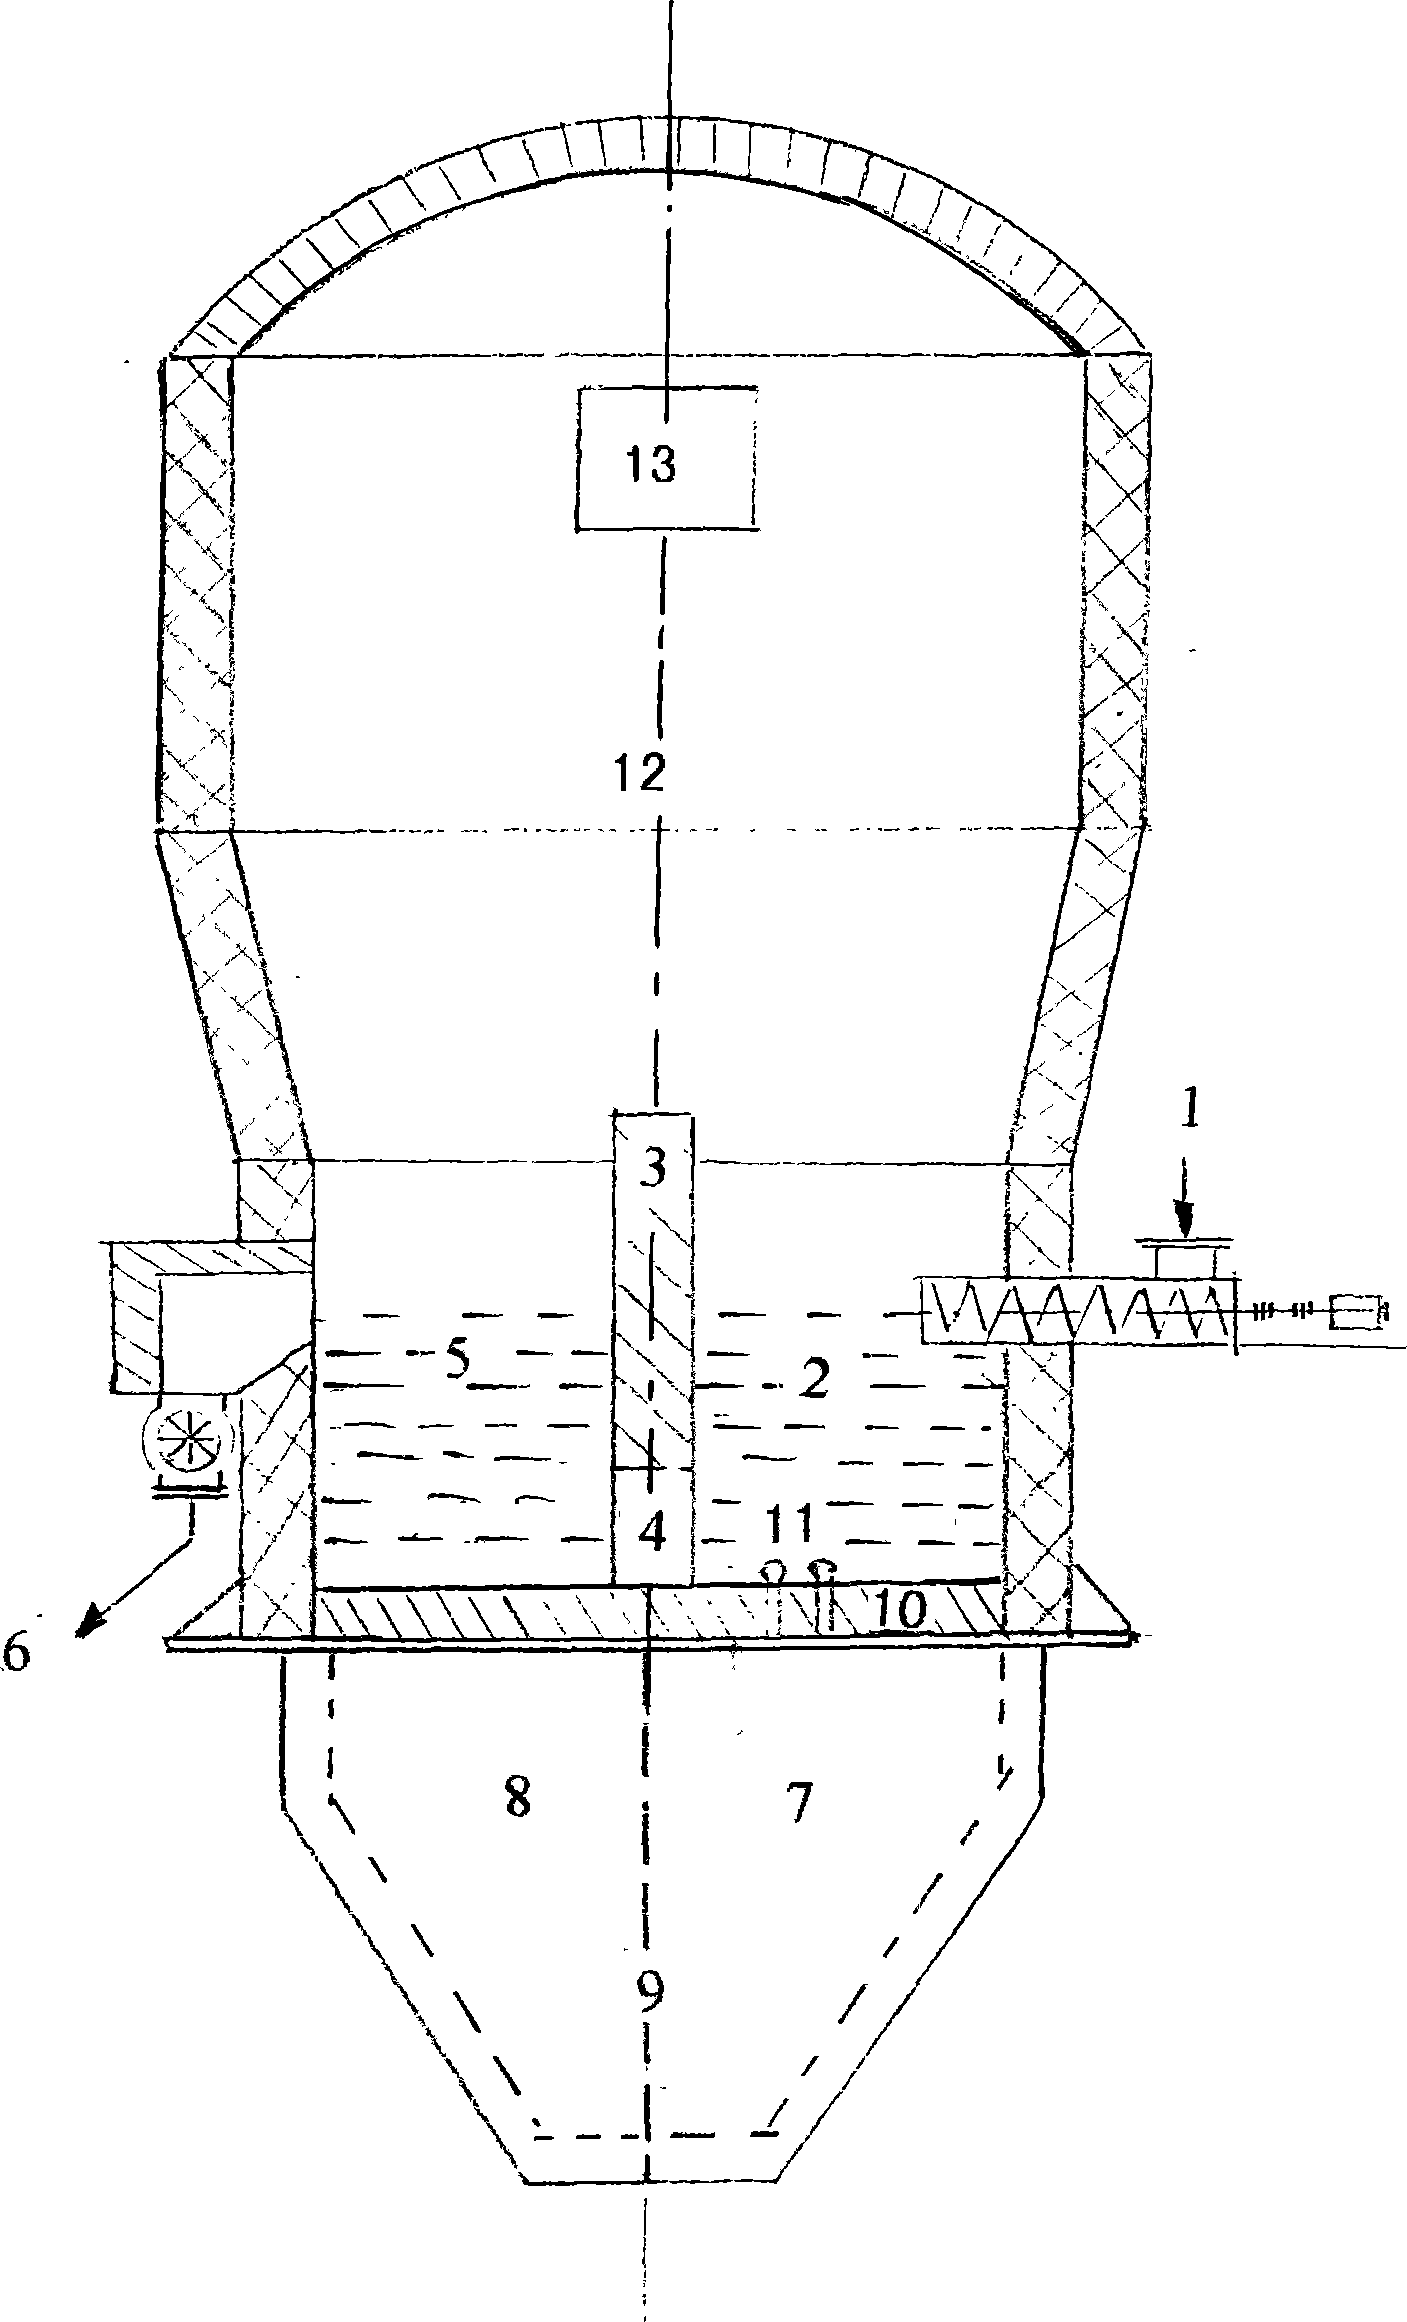 One-furnace-two-section boiling baking process